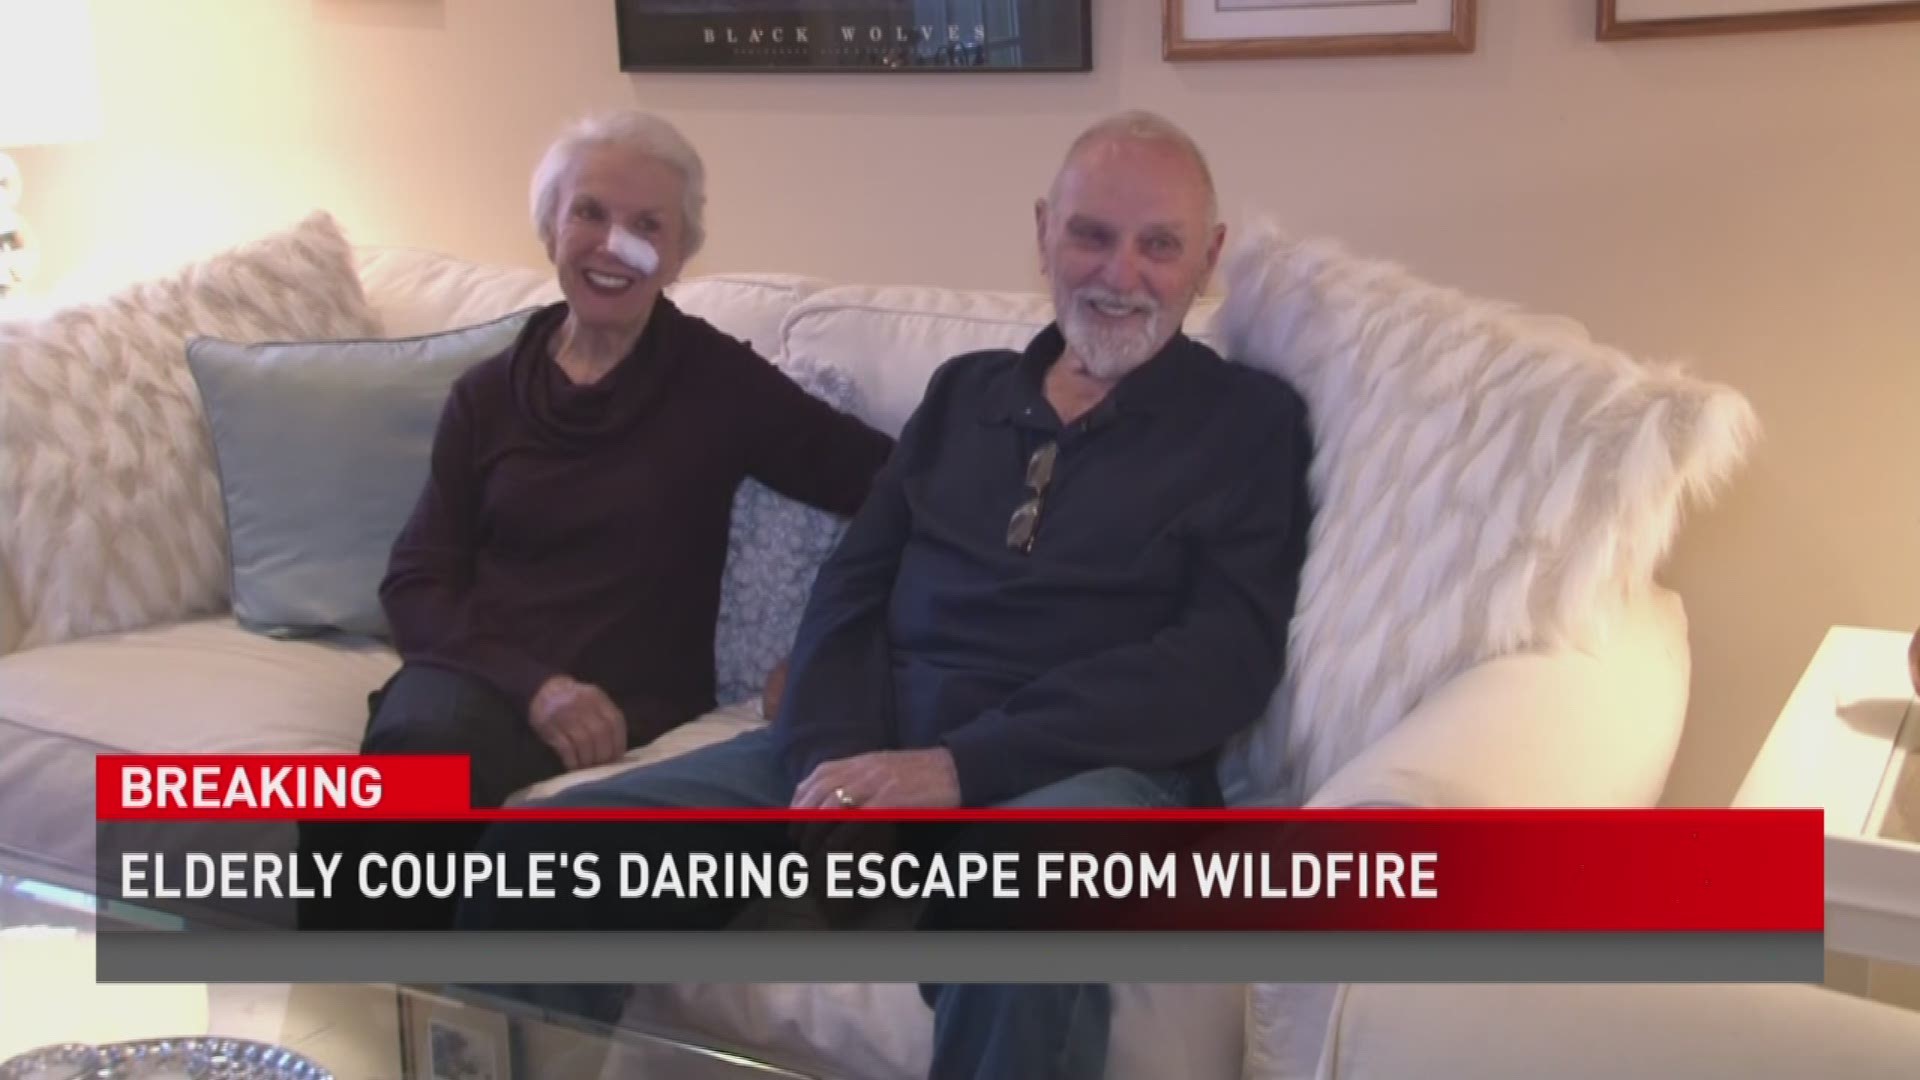 Dec. 1, 2016: A married couple who are 82 years old climbed and hiked out of the woods as fire destroyed their neighborhood Monday night. They made it out with only a few scrapes and bruises.